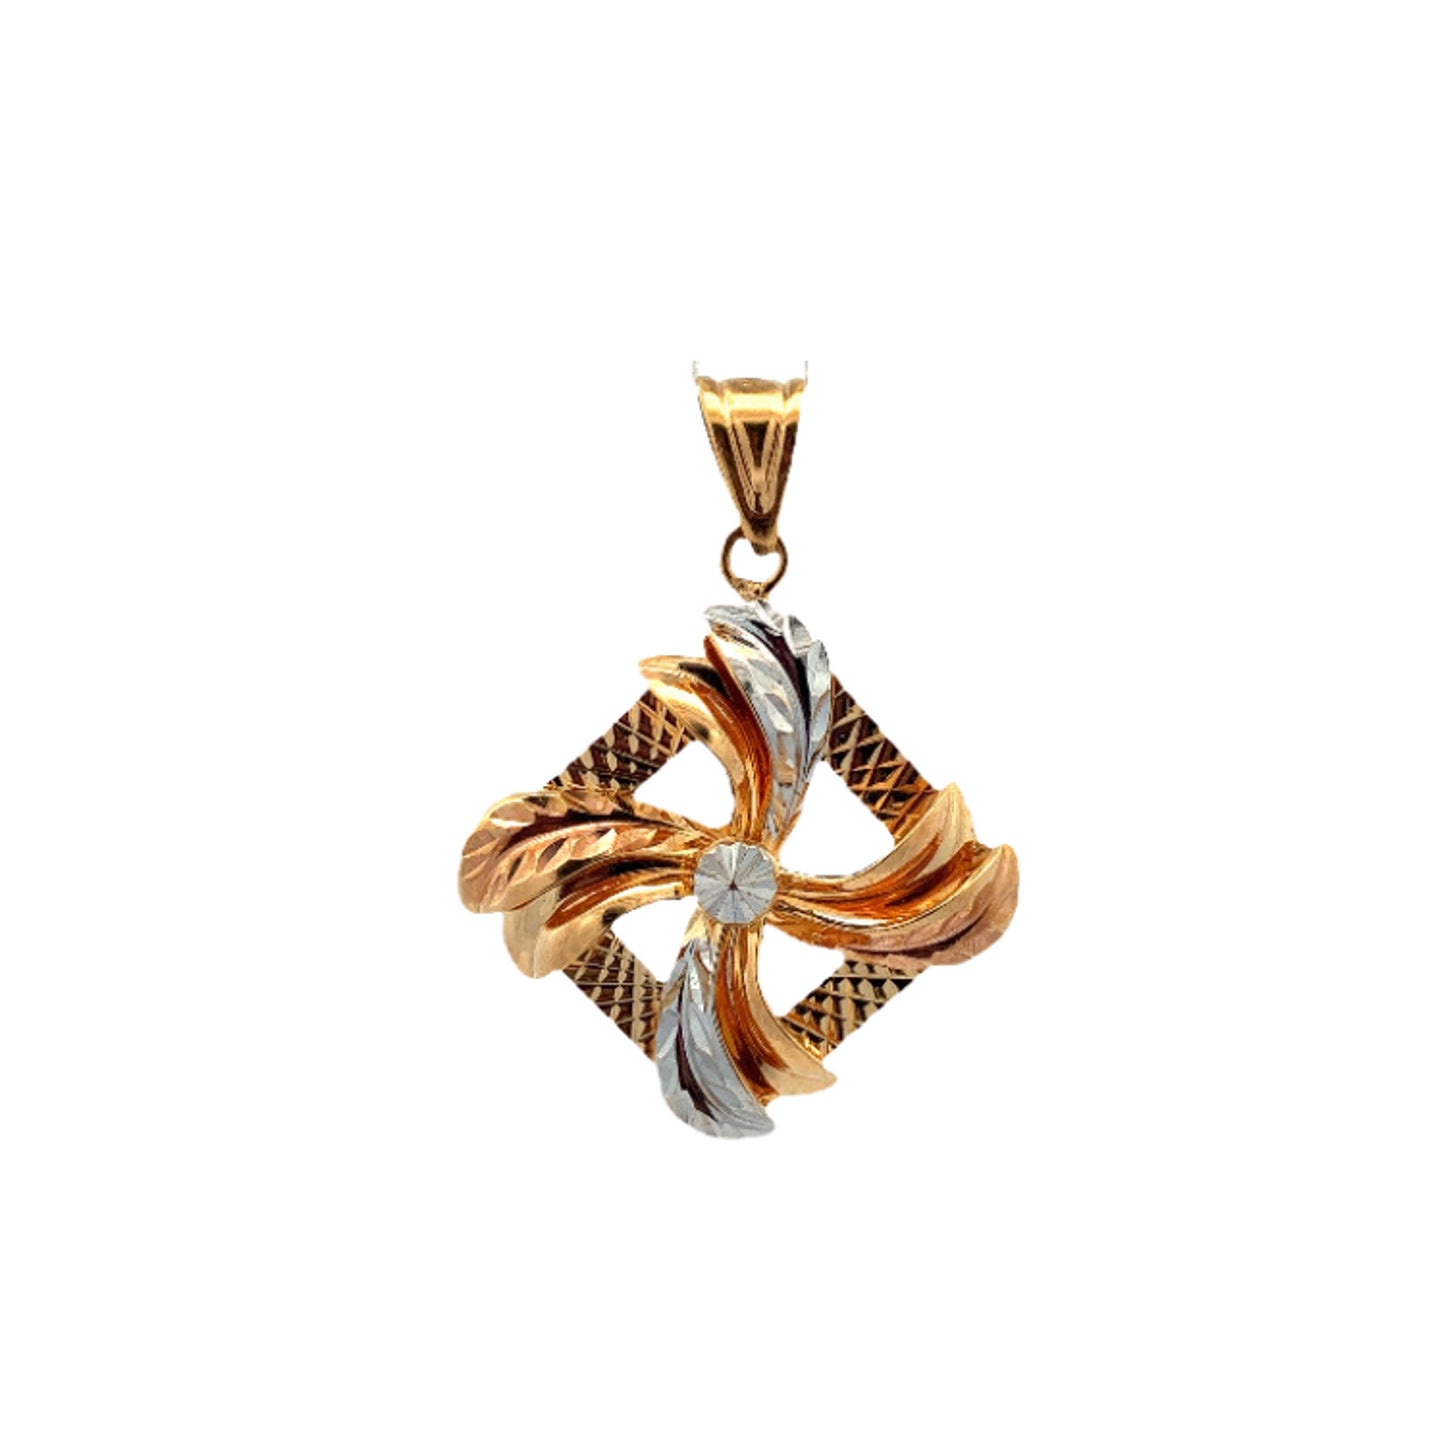 GOLD PENDANT ( 22K ) ( 4.96g ) - 0012522 Chain sold separately